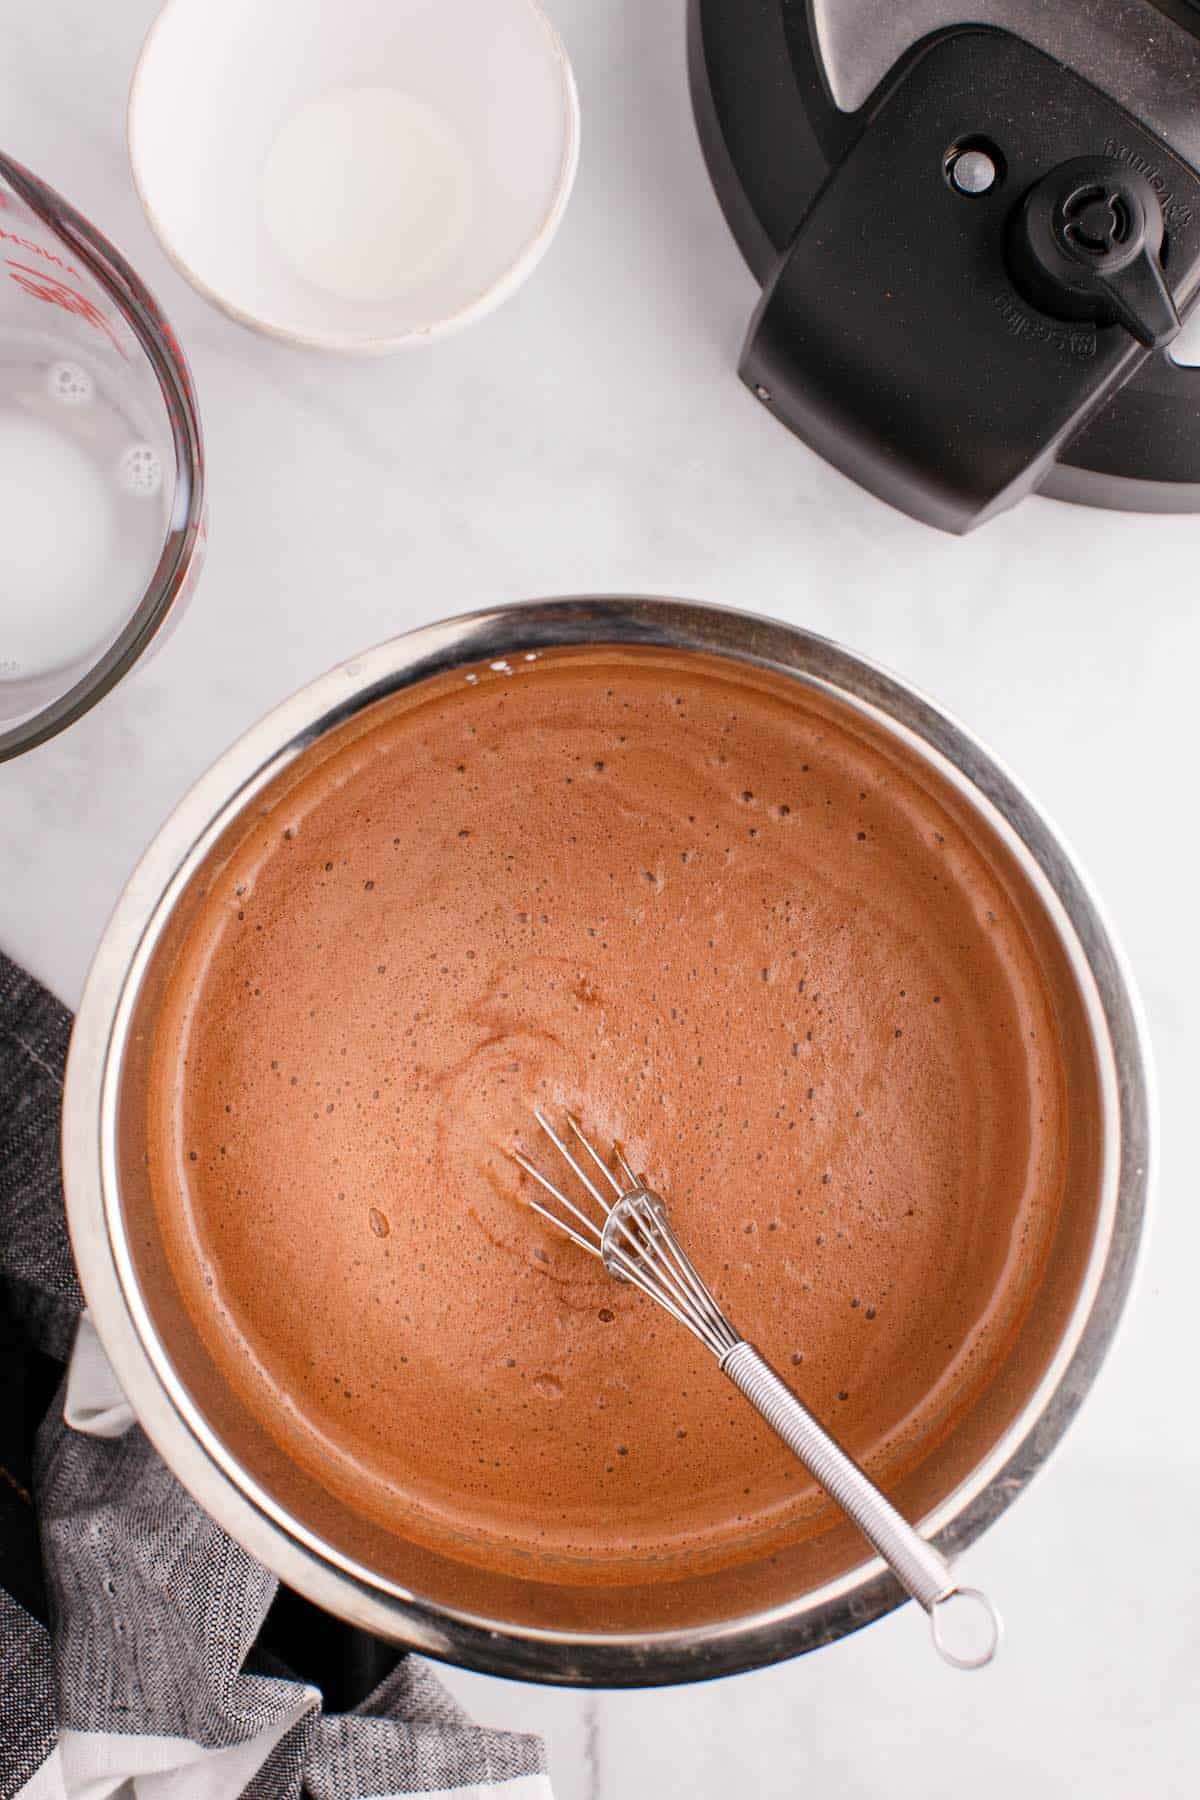 A pot of creamy hot chocolate in an instant pot insert with a whisk.